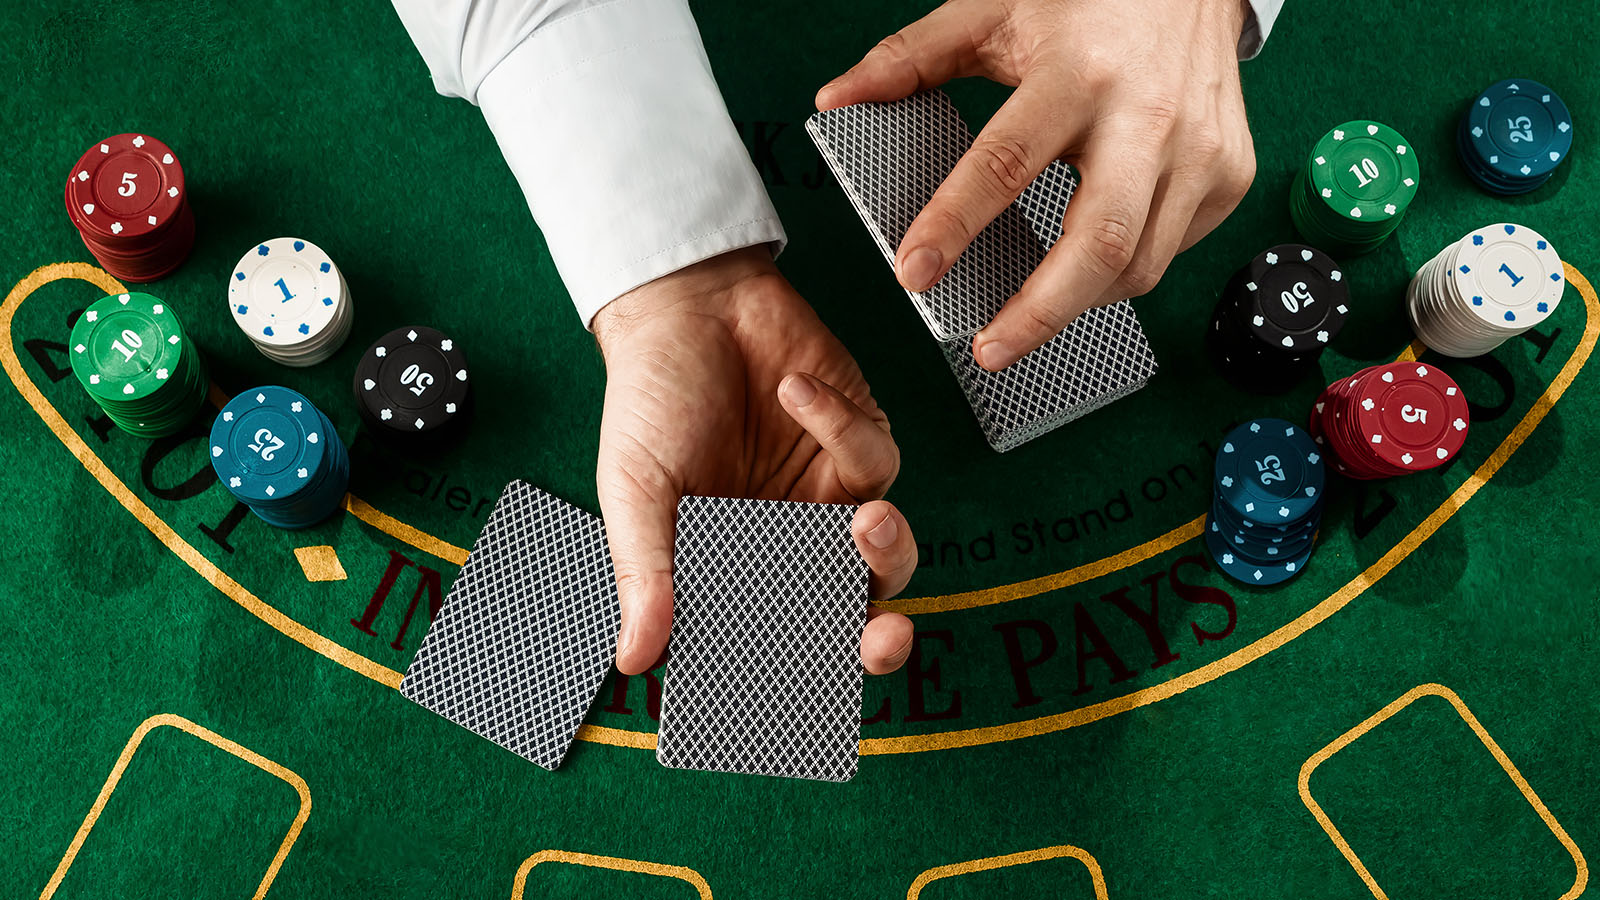 Blackjack table with dealer hand and chips